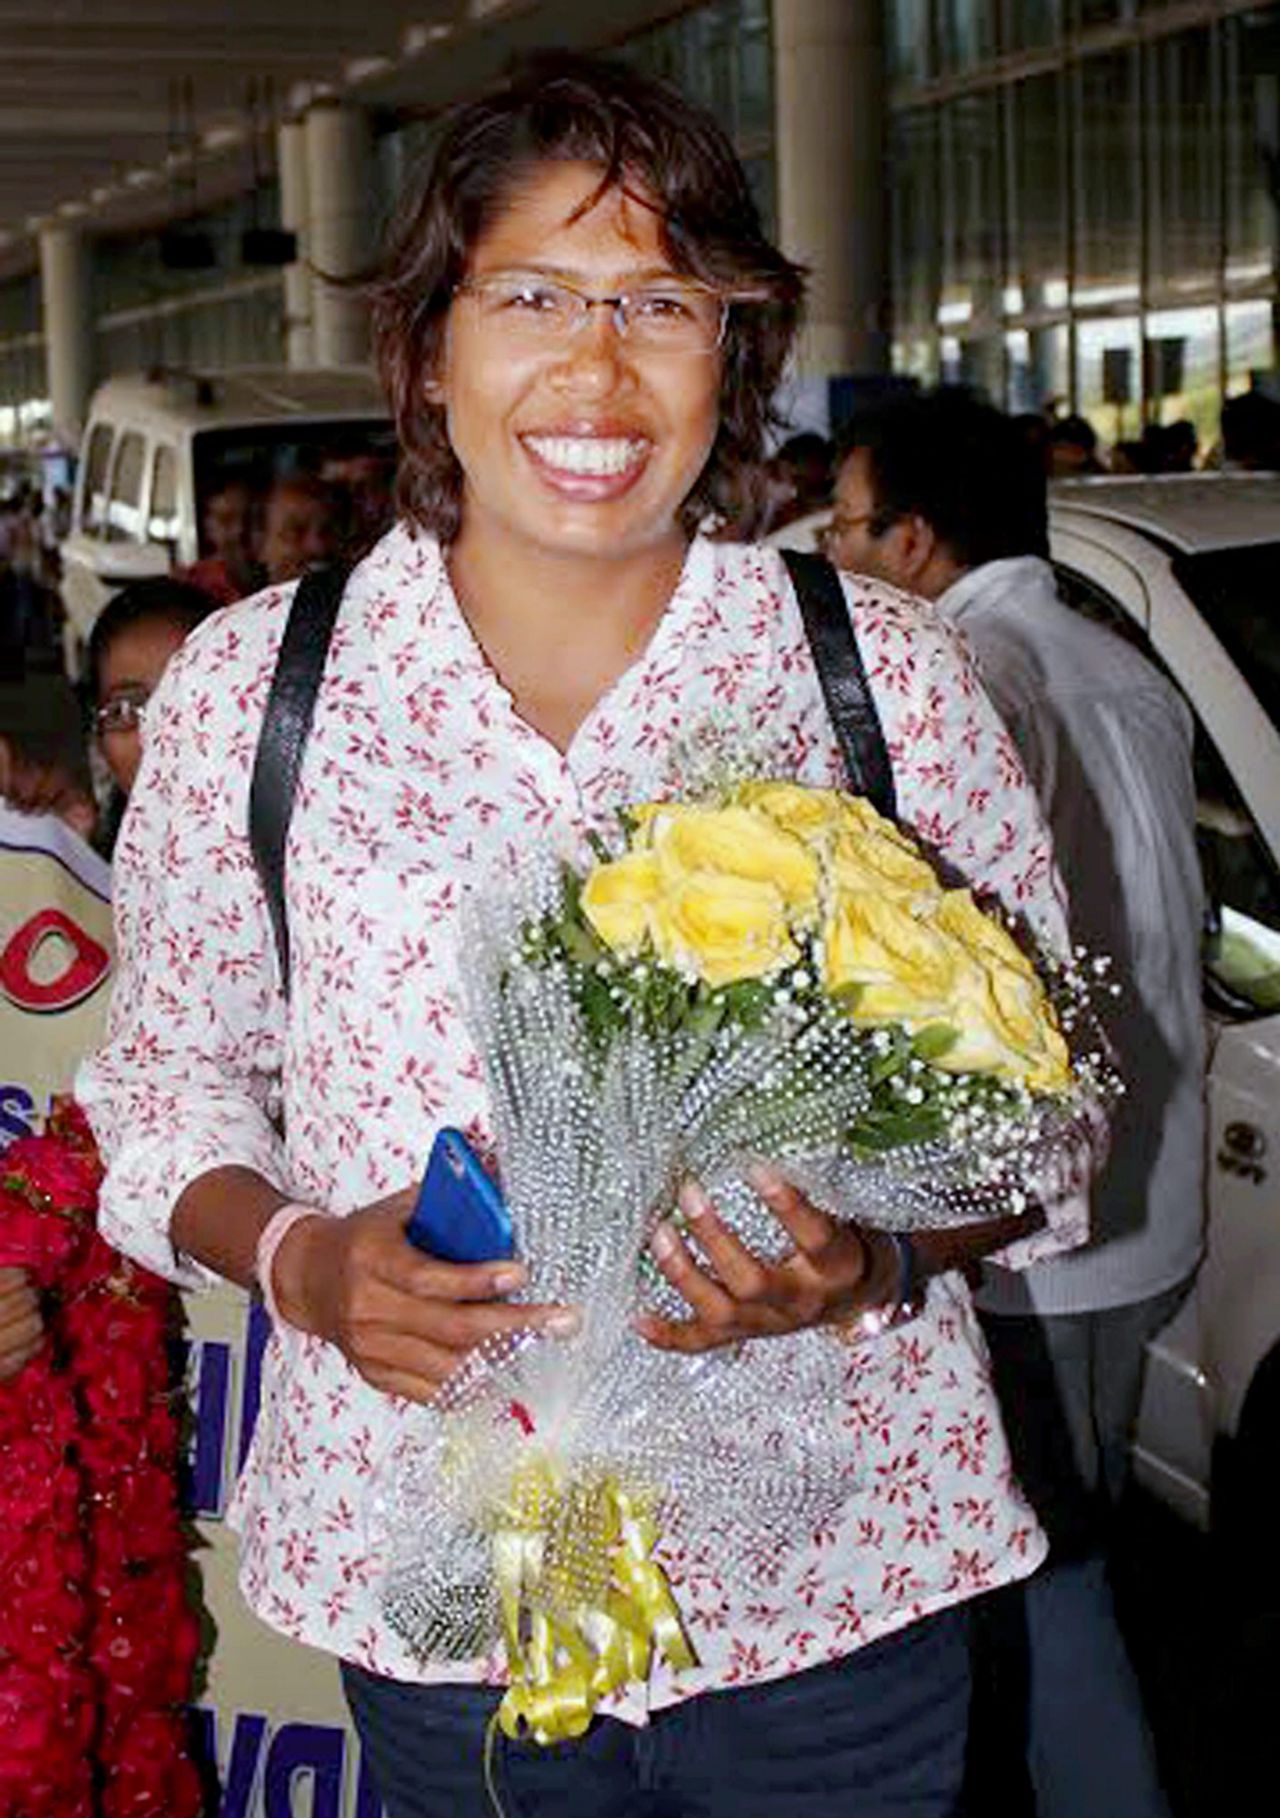 Jhulan Goswami received a warm welcome upon her arrival at the airport in Kolkata after becoming the leading wicket-taker in women's ODIs